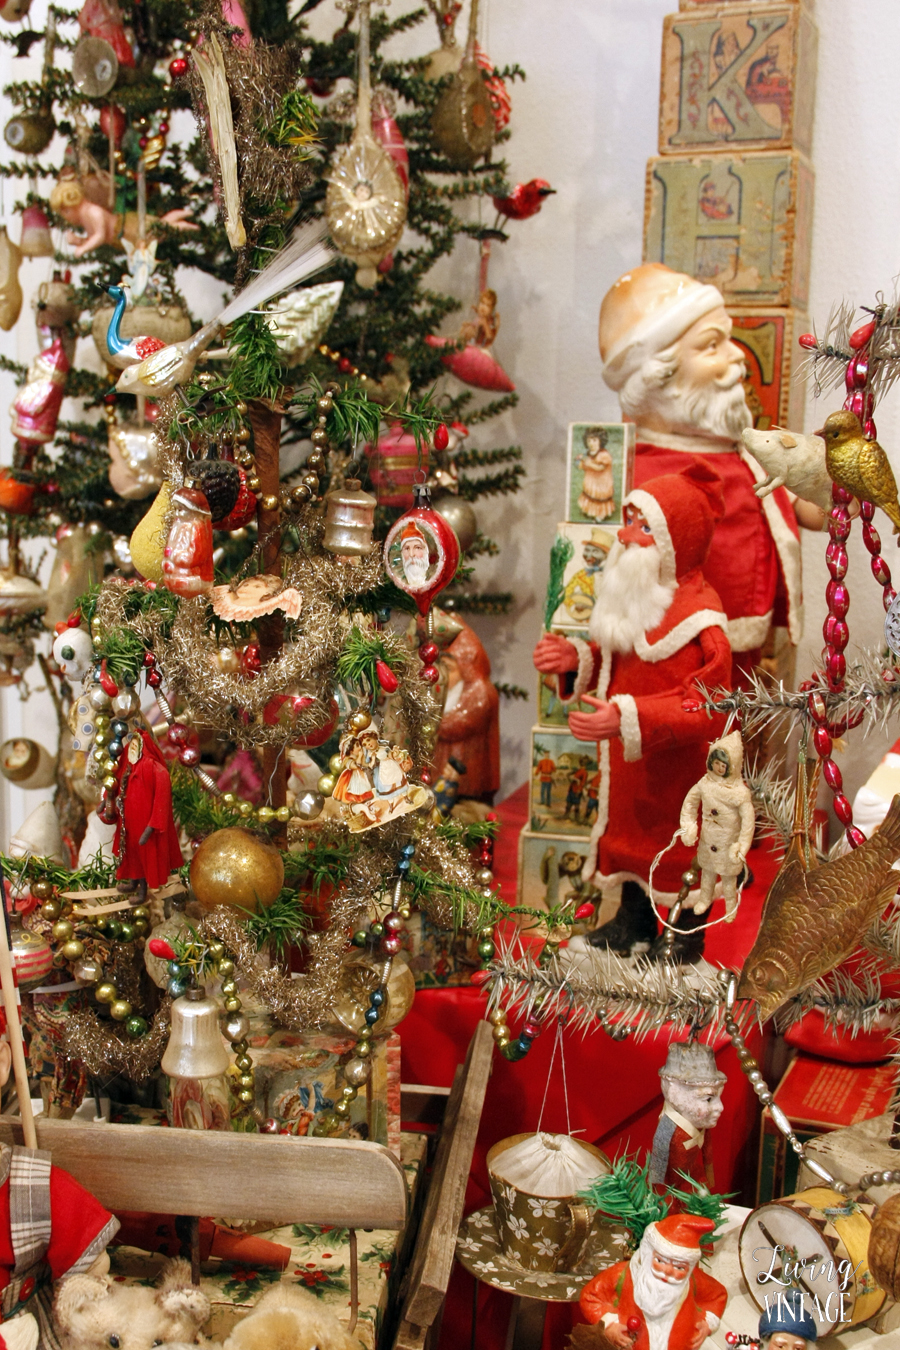 a pretty and elaborate display of an astounding Christmas collection